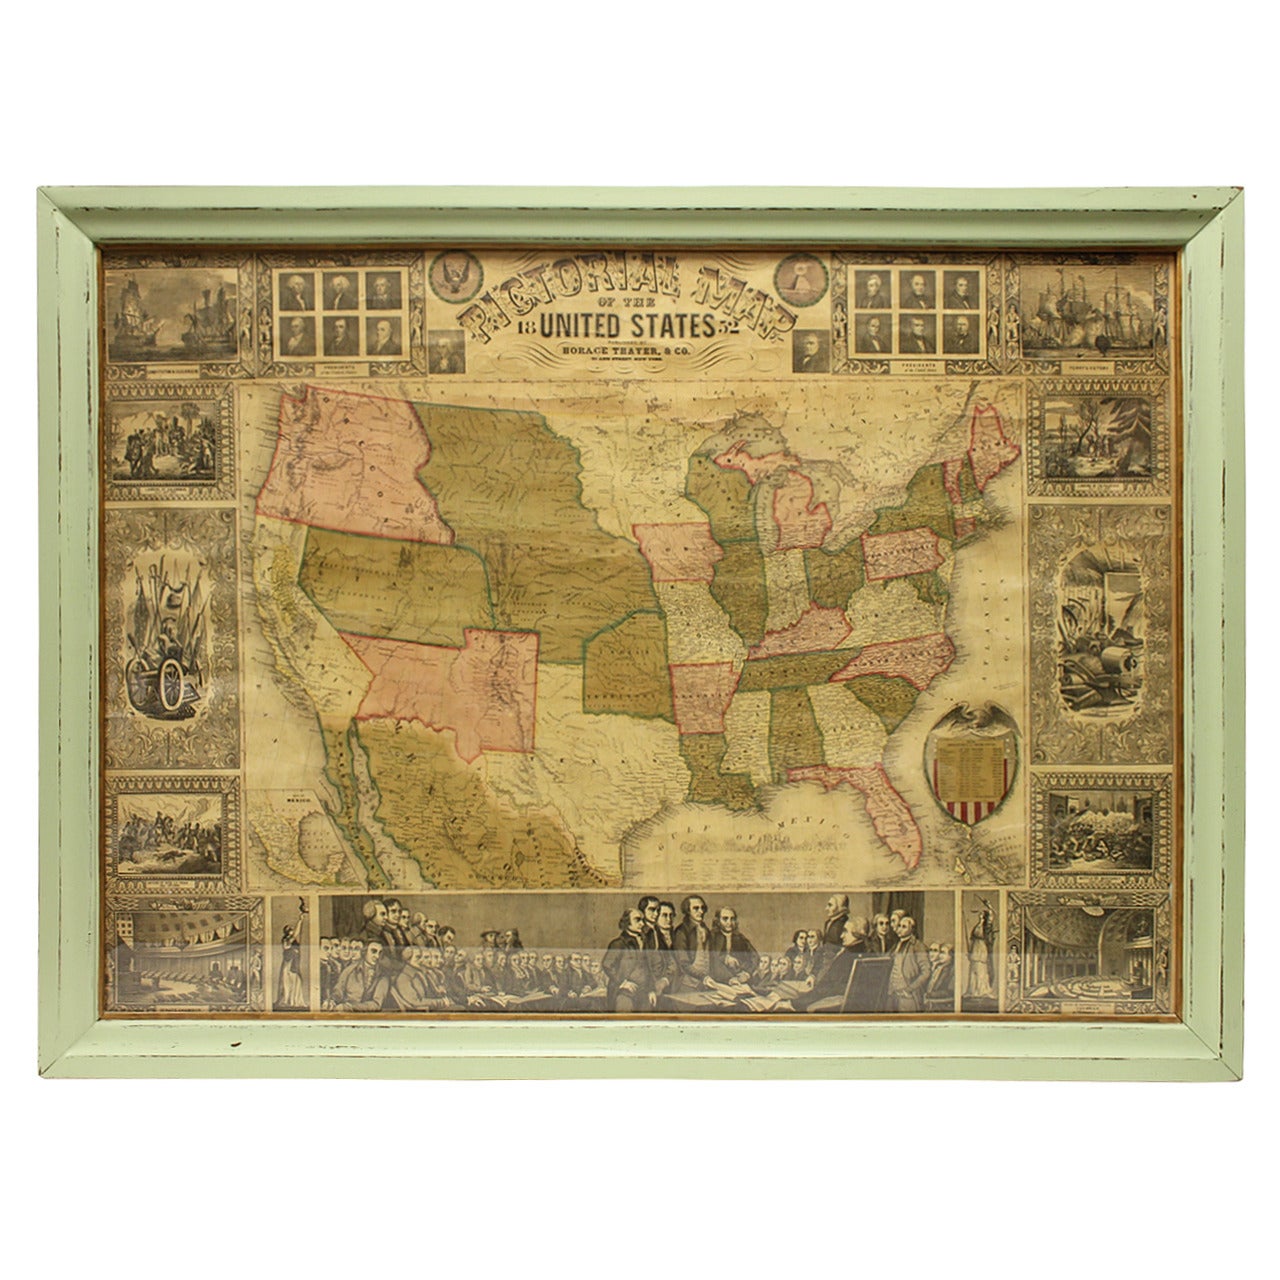 Rare Original 1852 Pictorial Map of the United States by Thayer Co.